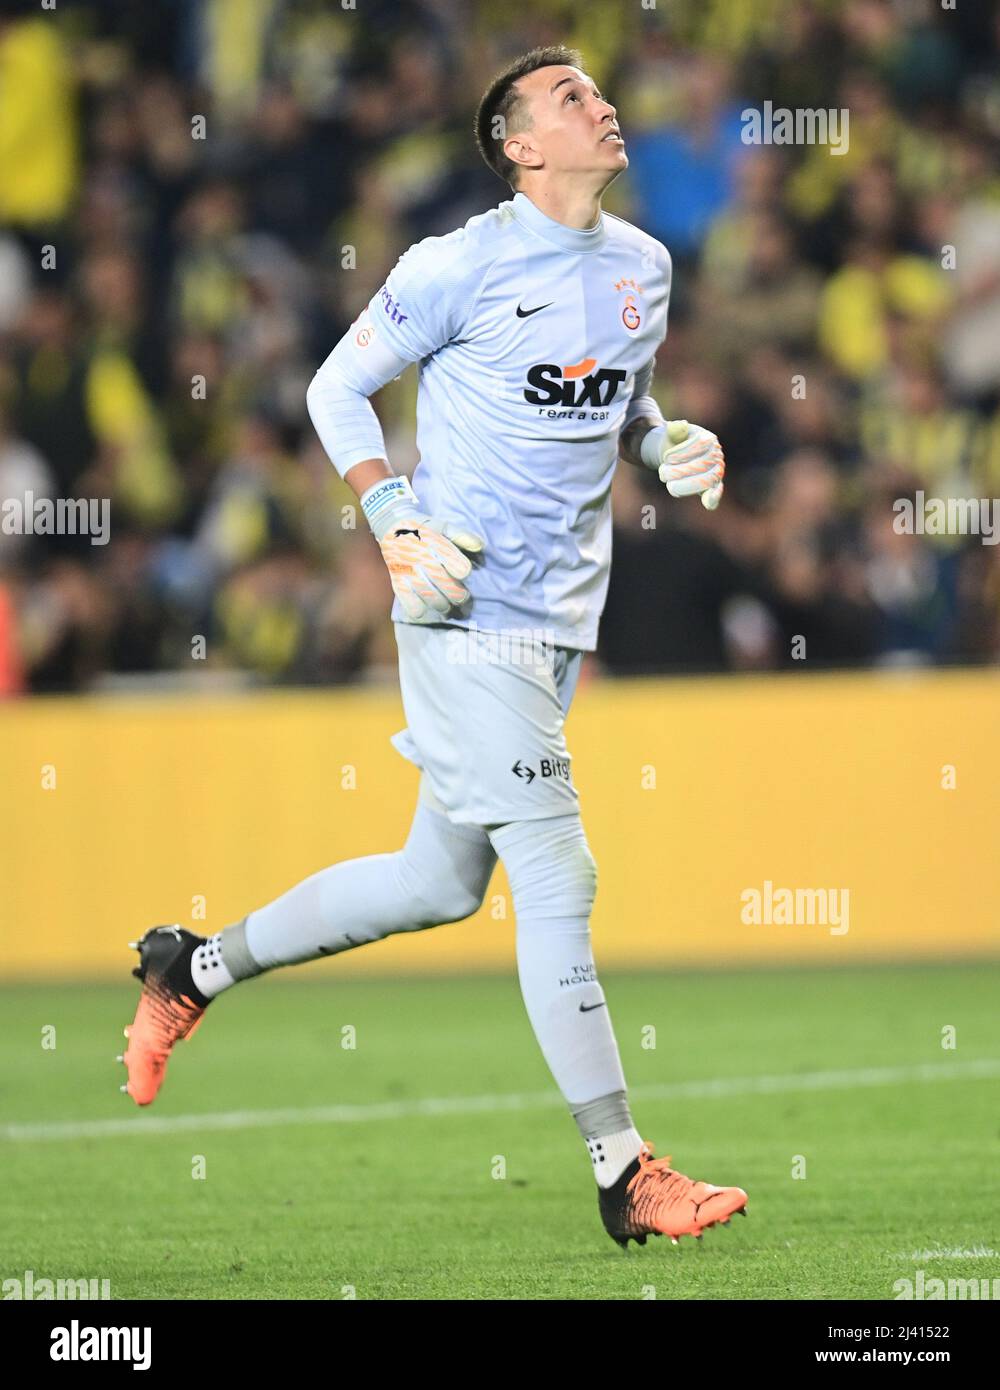 April 10, 2022, Istanbul, Warsaw, Turkey: Goalkeeper Fernando Muslera of  Galatasaray during the Turkish Super League derby match between Fenerbahce  and Galatasaray at Ulker Stadiumin Istanbul , Turkey on April 10 ,